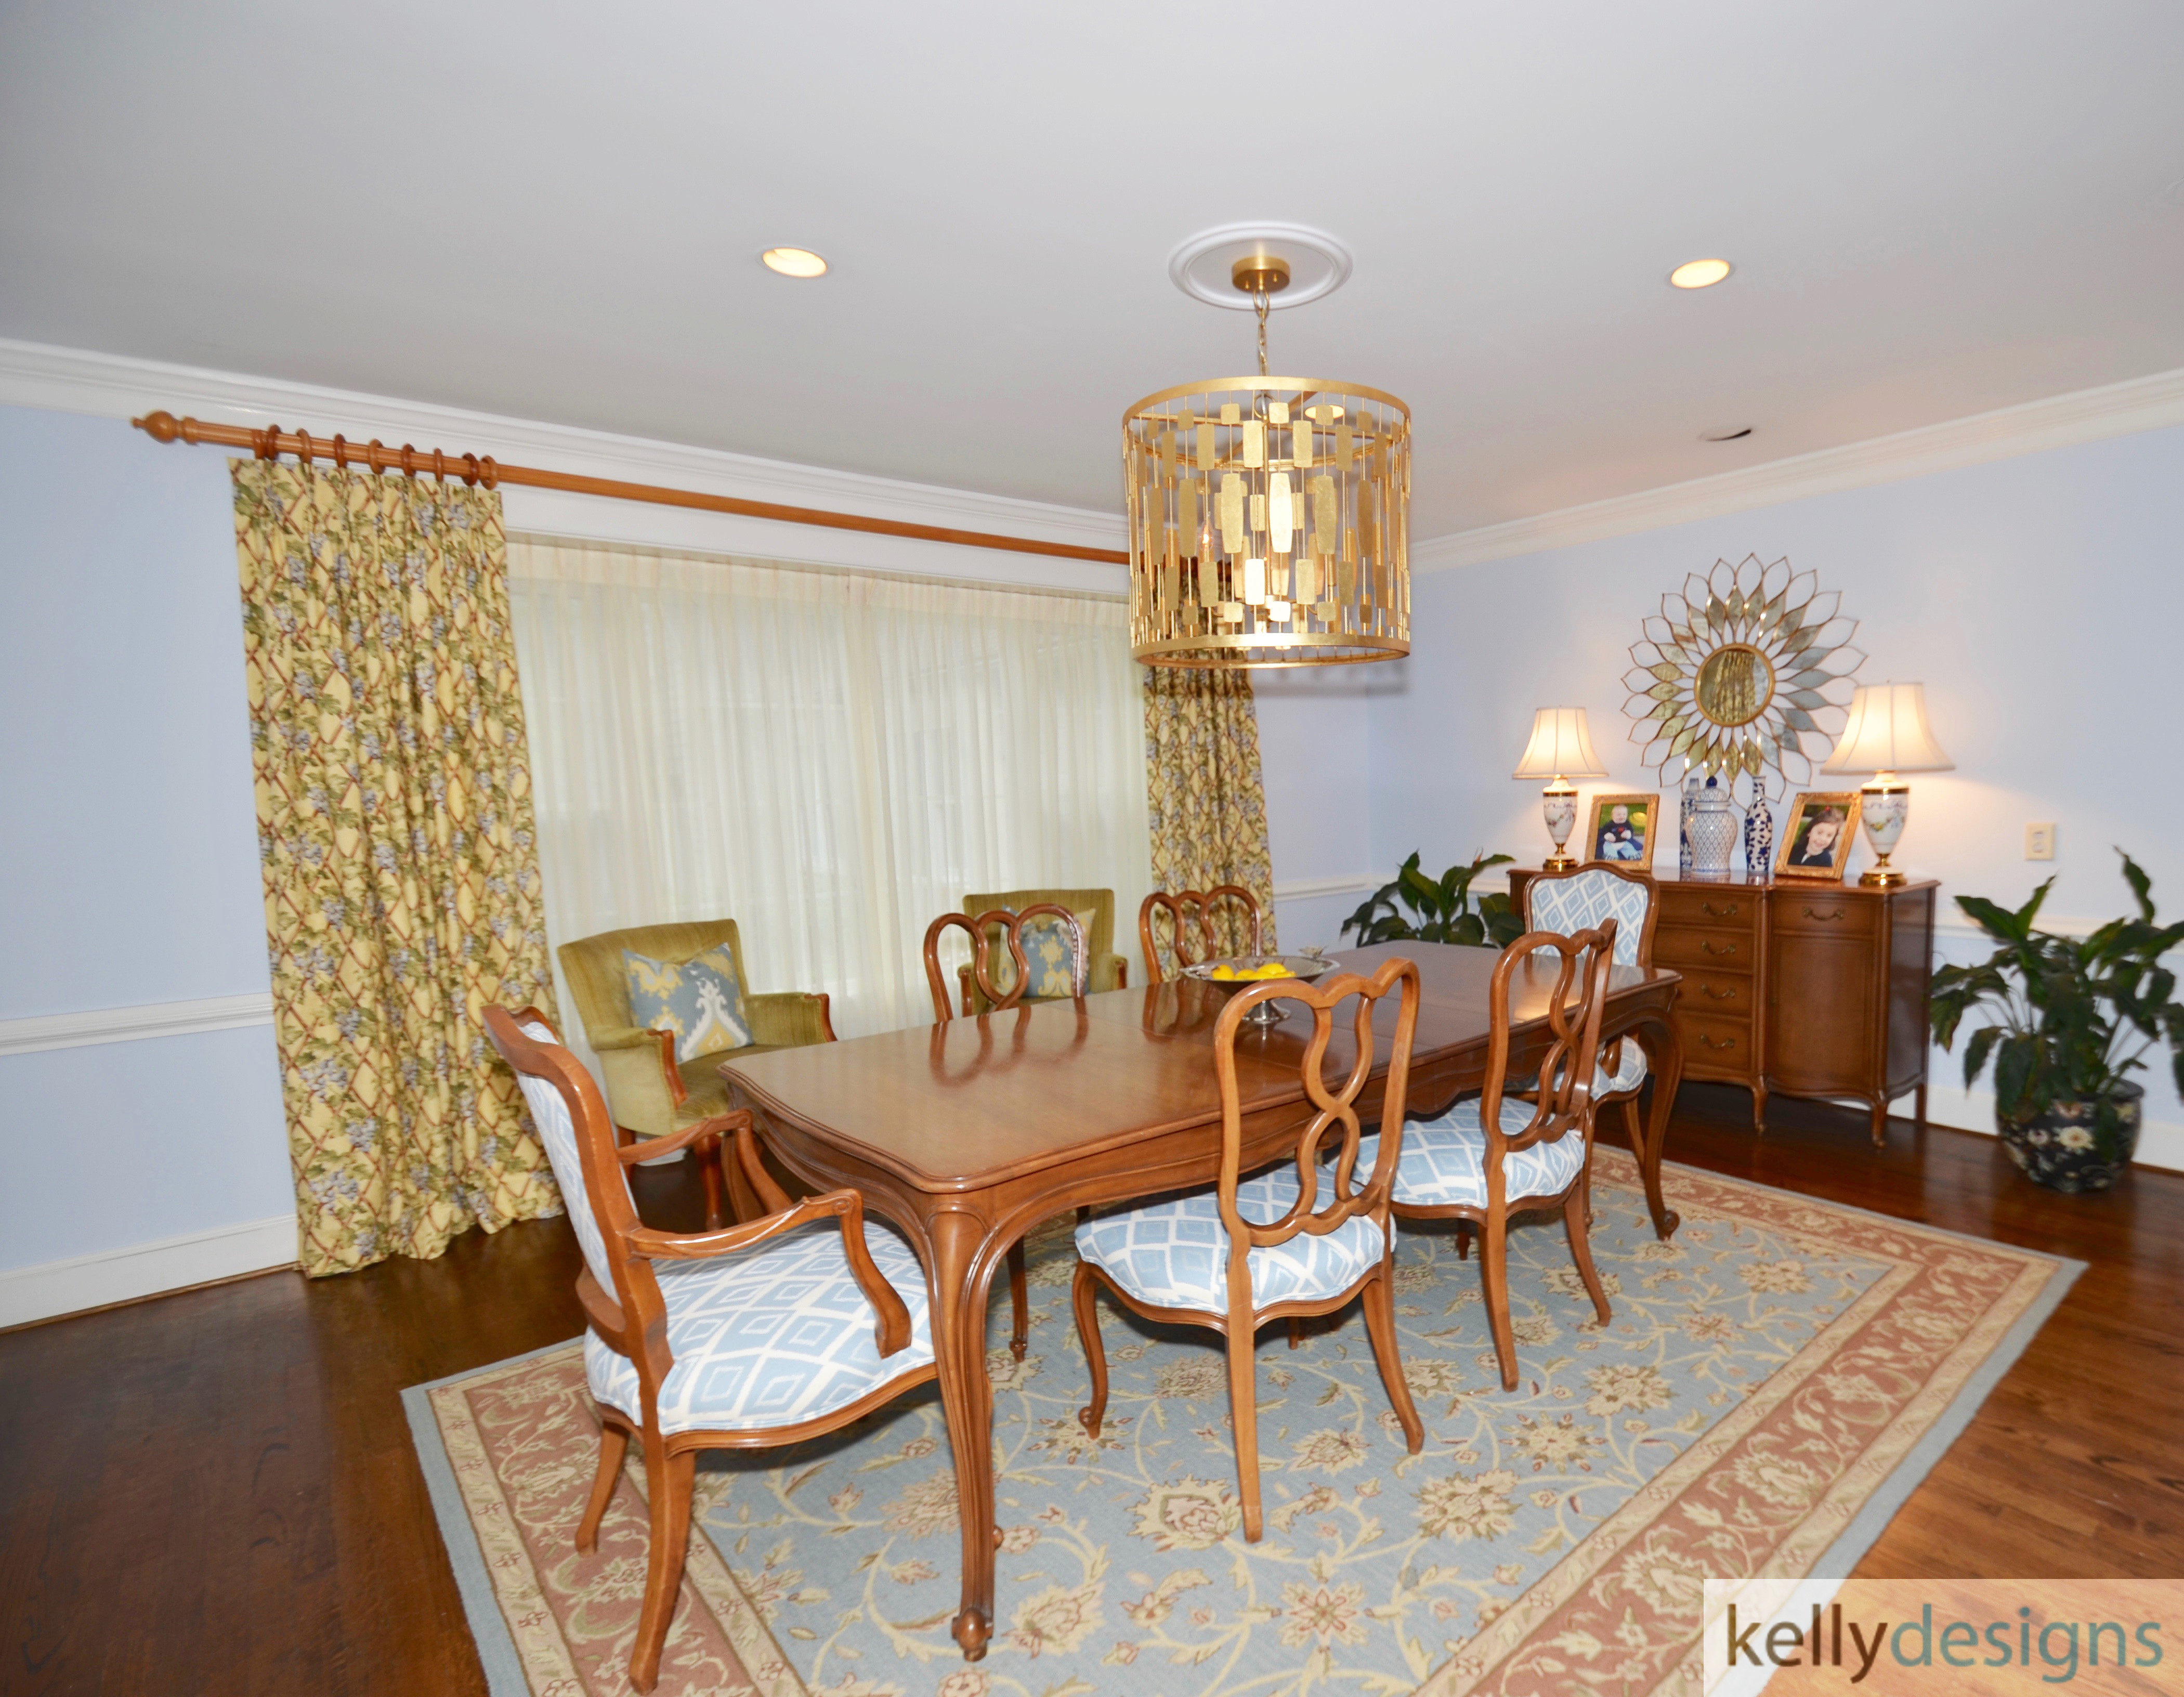 Preppy With A Purpose   Dining Room   Interior Design By Kellydesigns